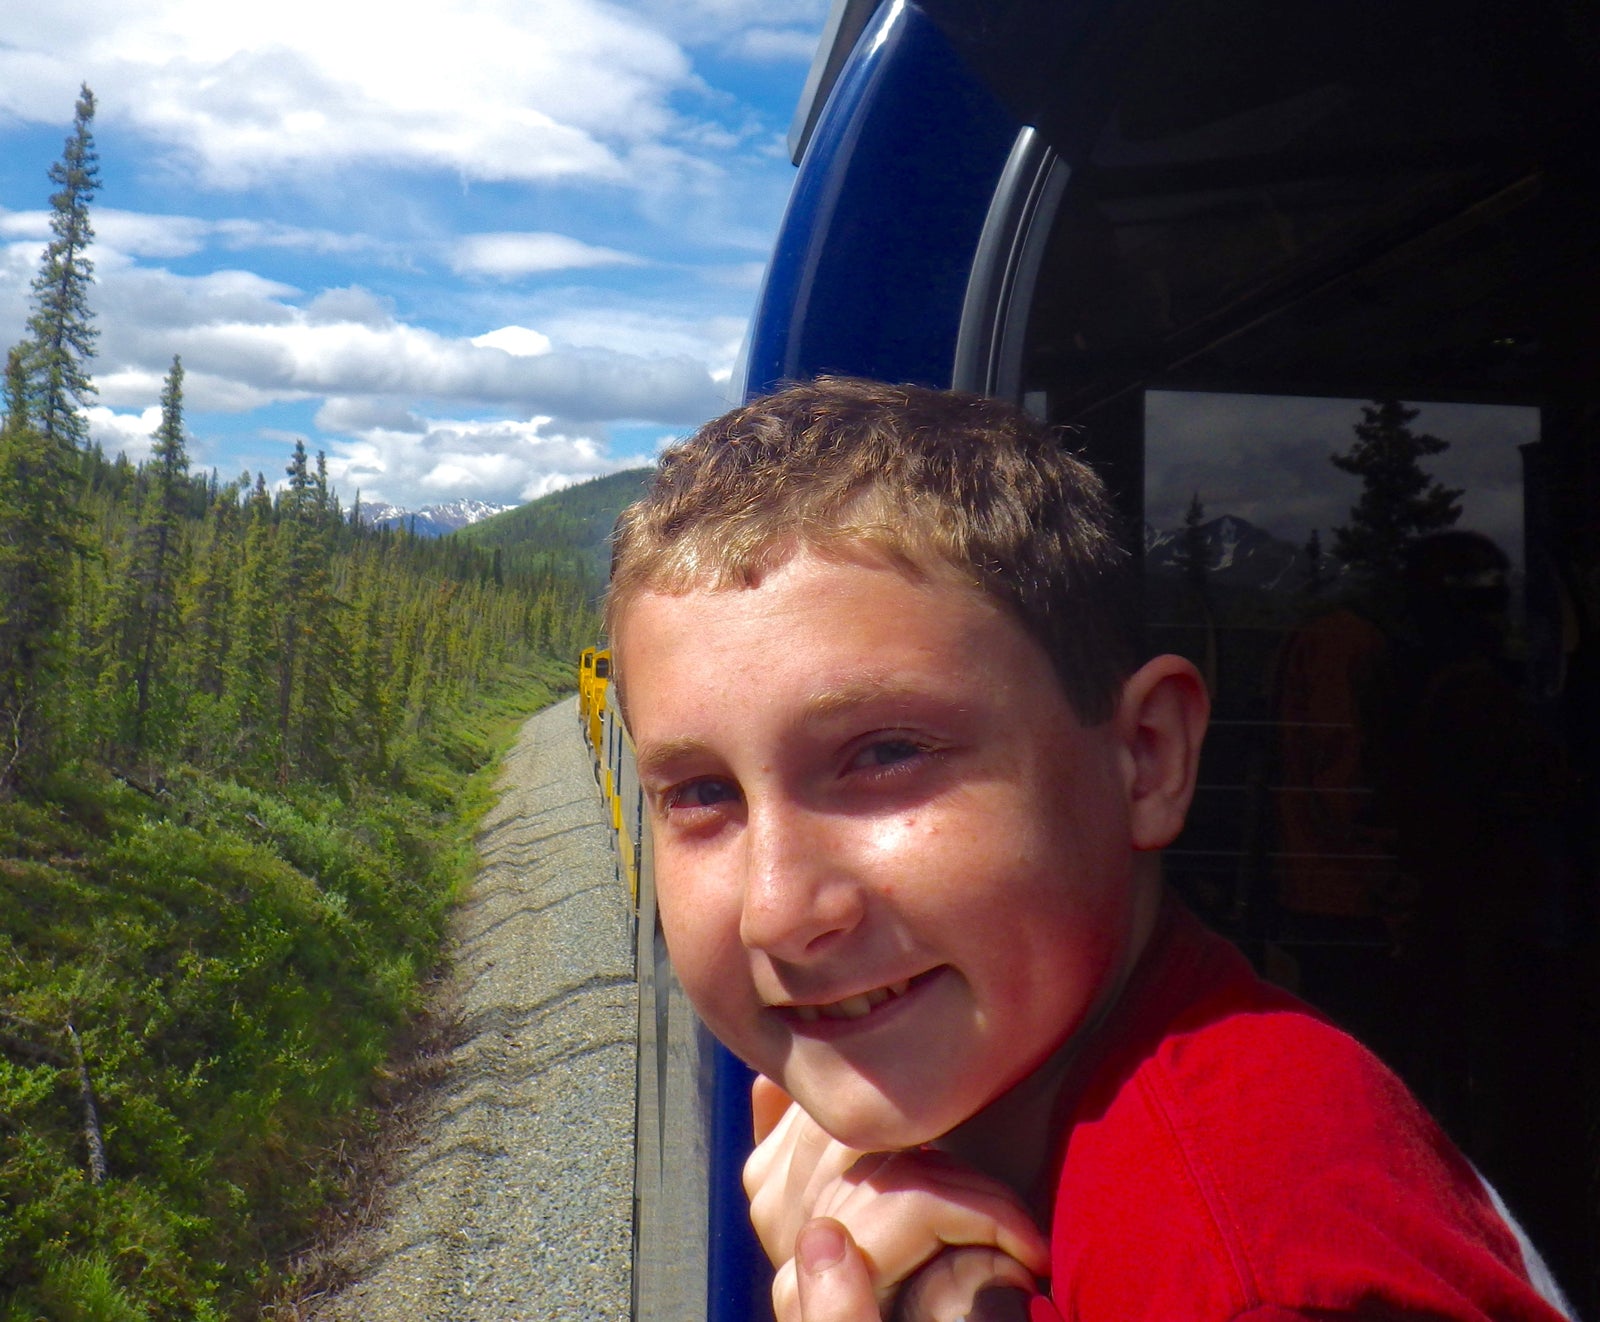 Close up of boy smiling as he leans out of a train in the woods.